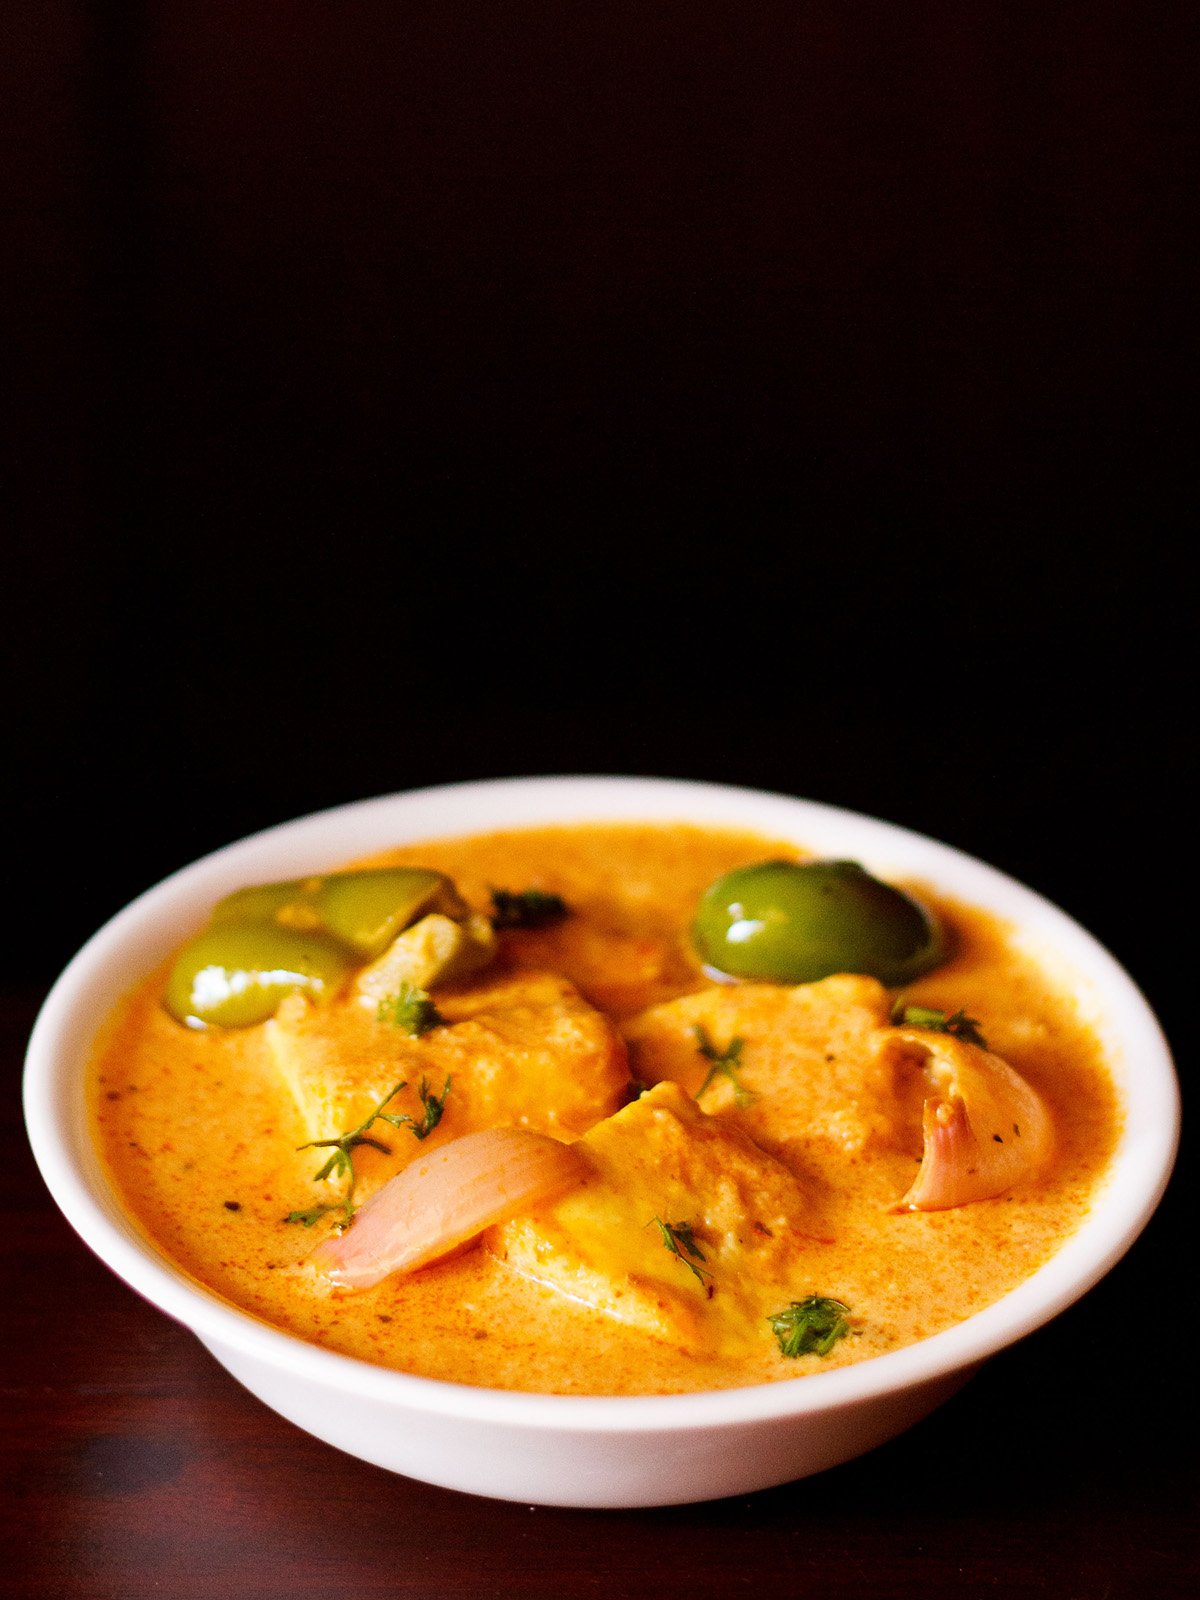 paneer tikka masala served in a white bowl garnished with some coriander leaves on a dark mahogany board.